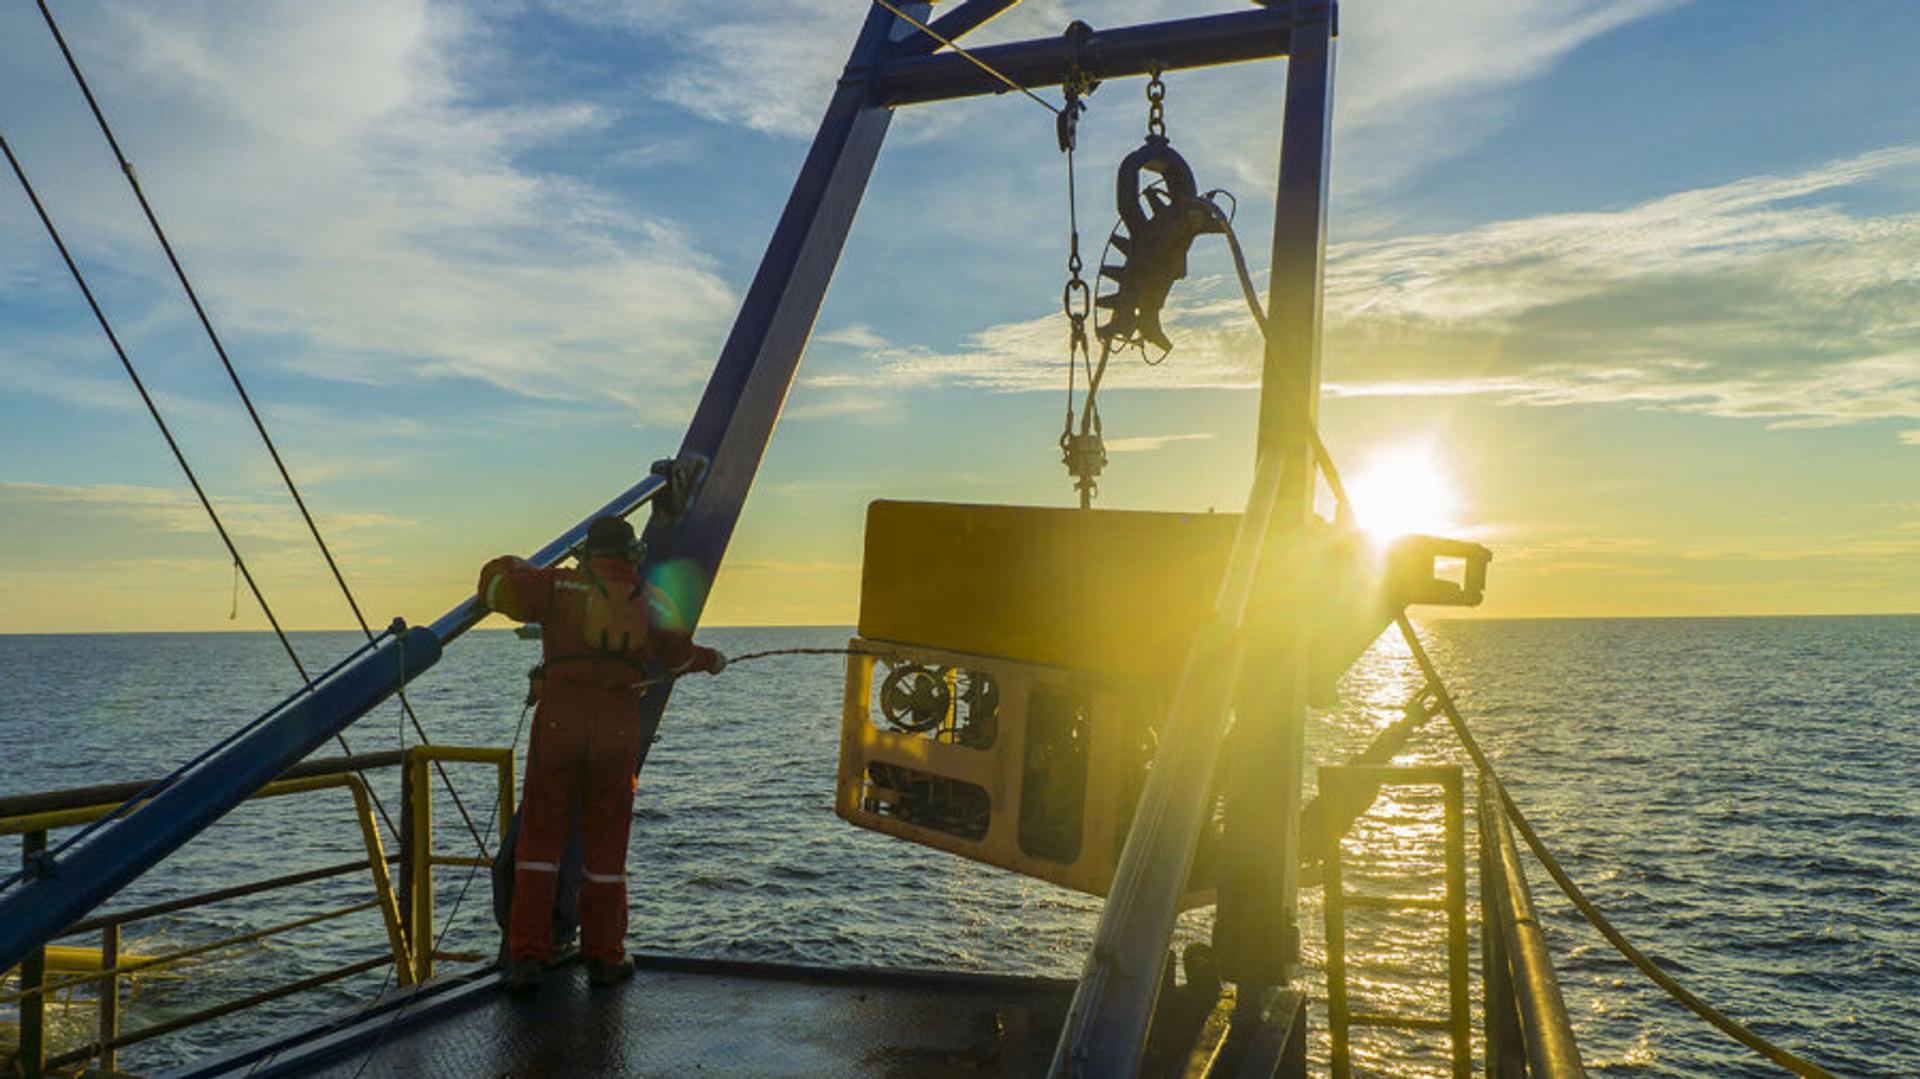 Equipment for data acquisition being lowered into the water from a ship